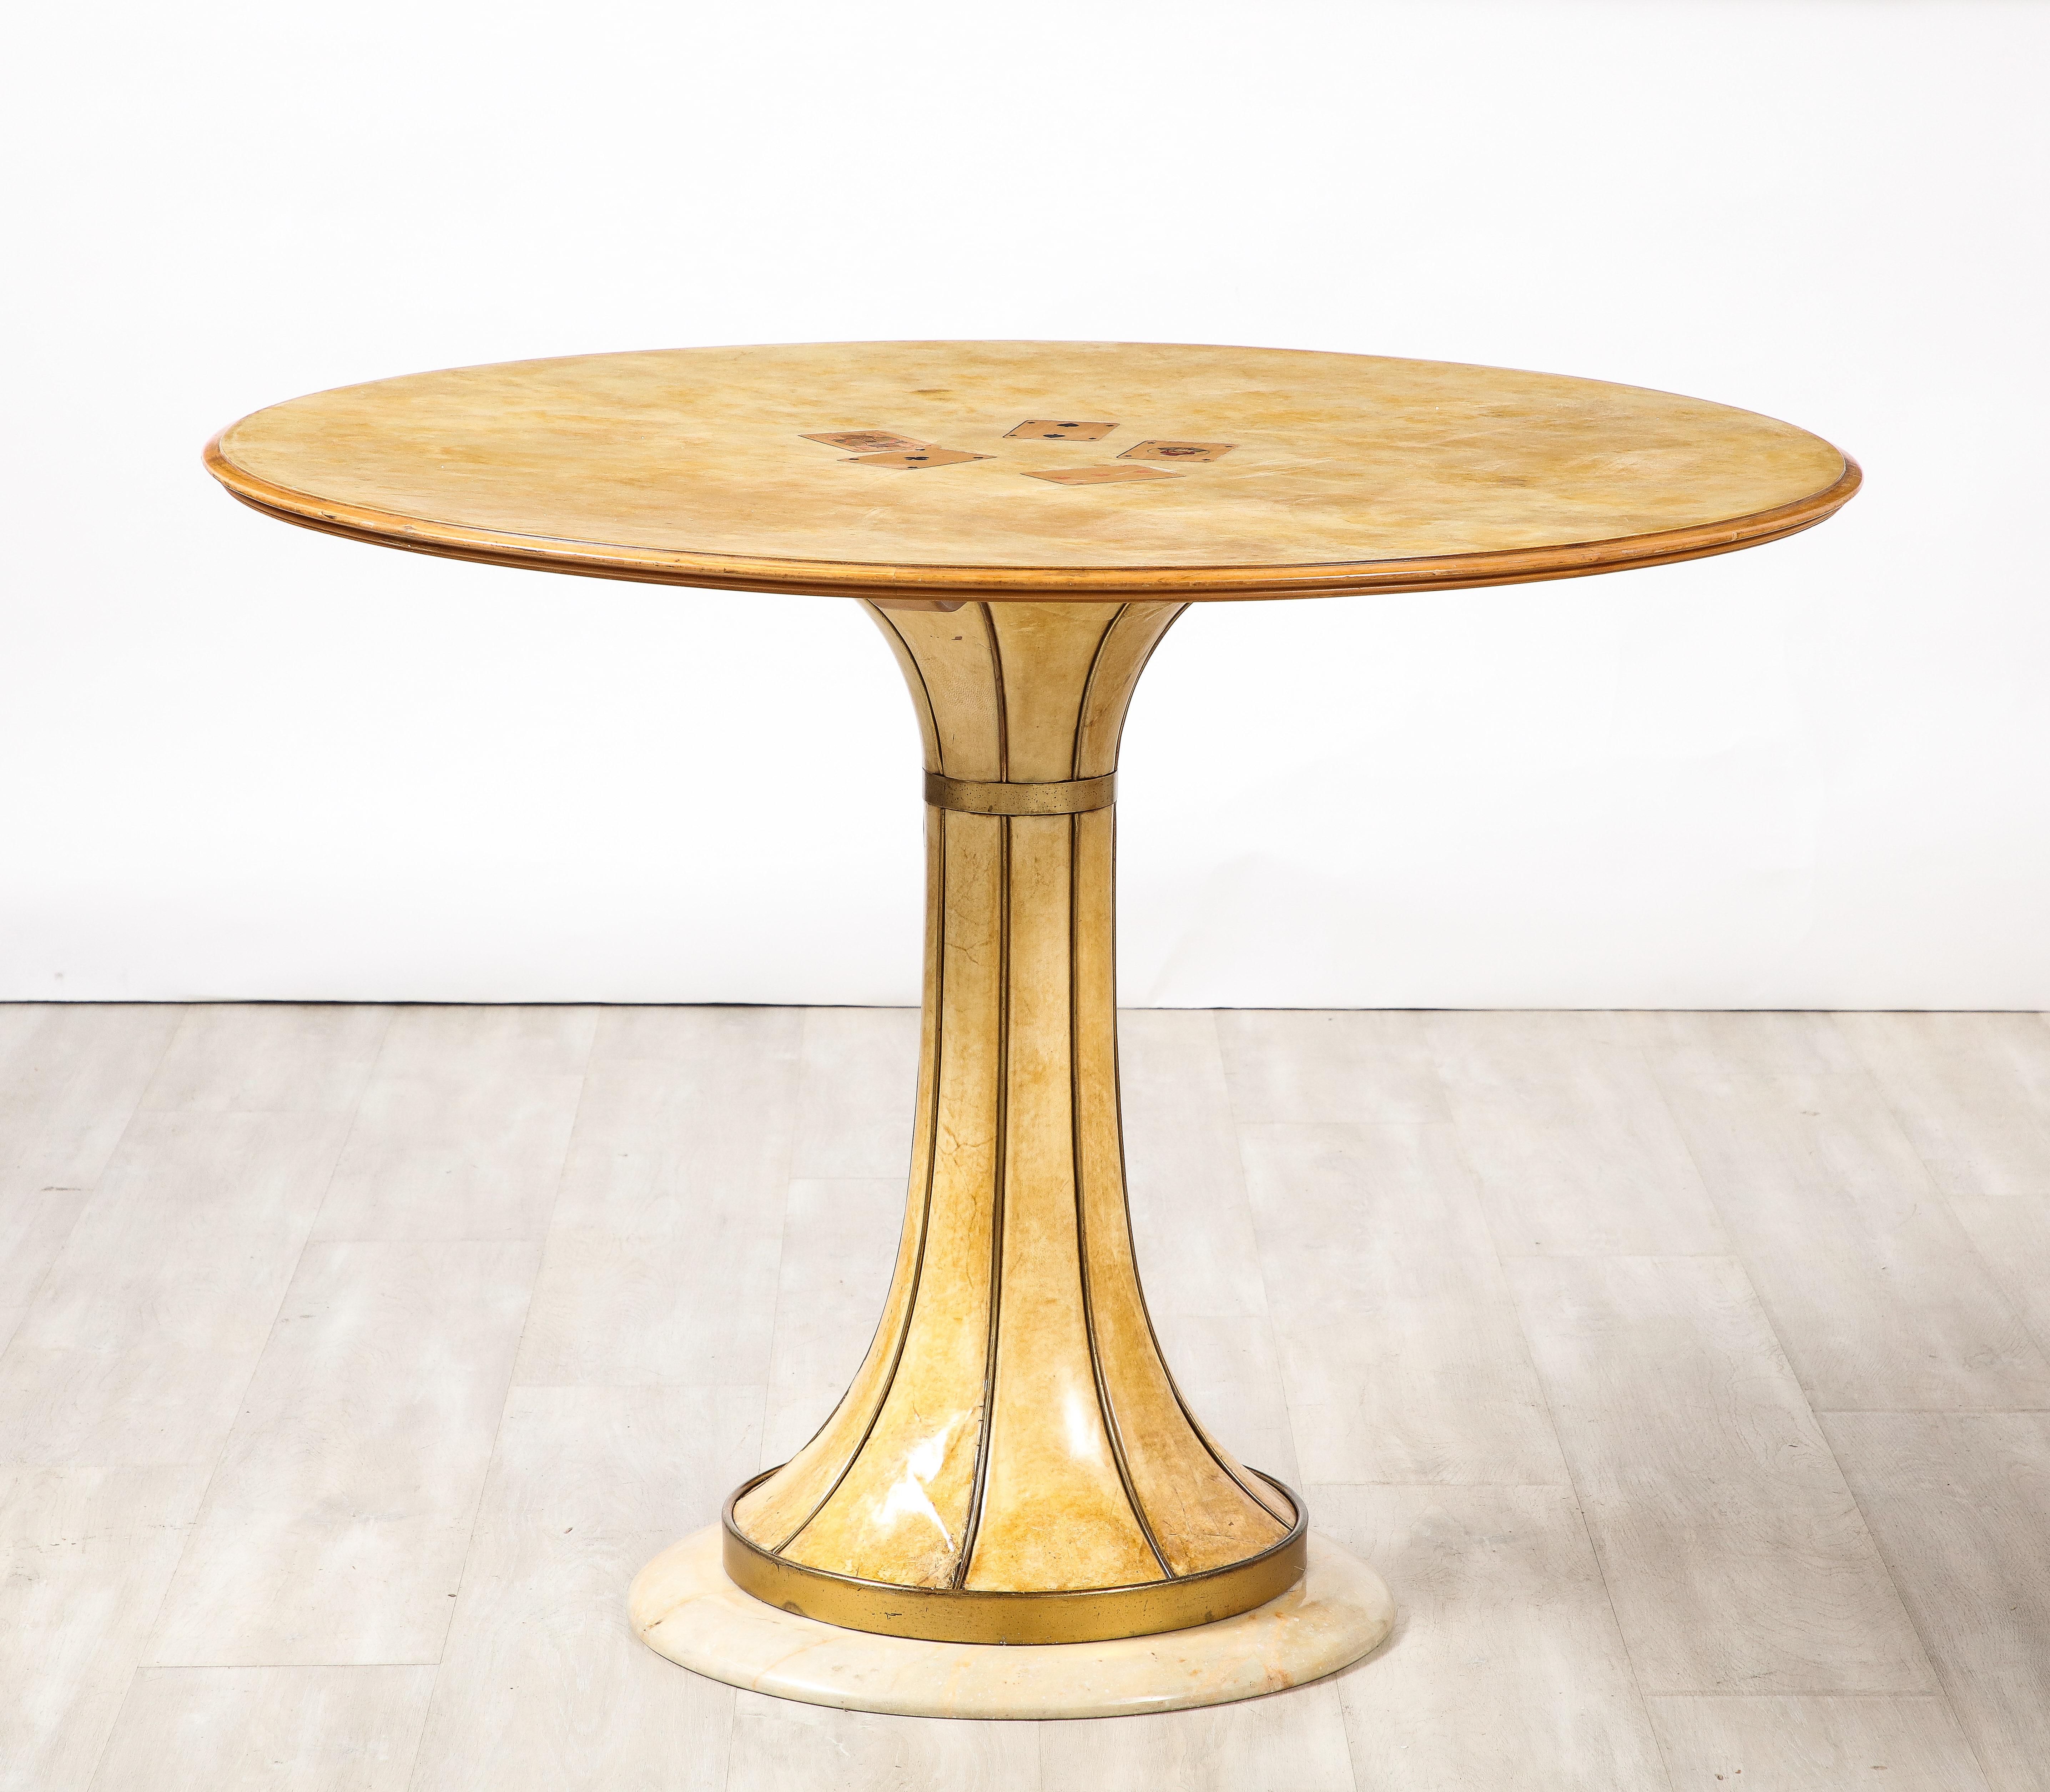 A highly unique and rare masterfully crafted center games table, attributed to the iconic Italian designer, Osvaldo Borsani. The circular top is supported on a vellum tapered pedestal base with brass banding decoration towards the top and at the